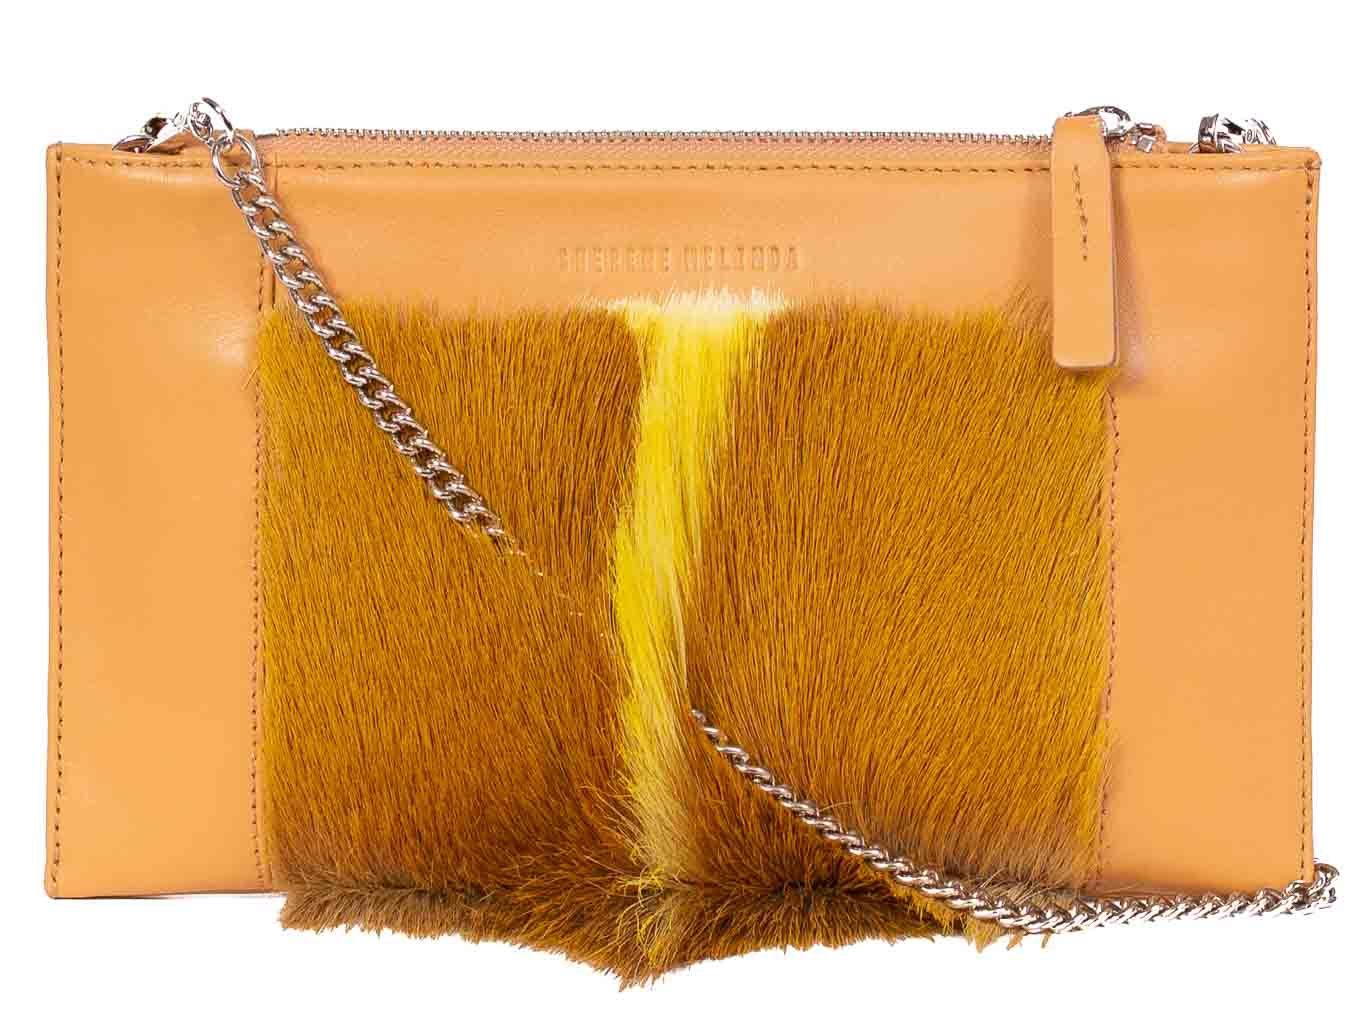 Clutch Springbok Handbag in Sunflower Yellow with a fan feature by Sherene Melinda front strap